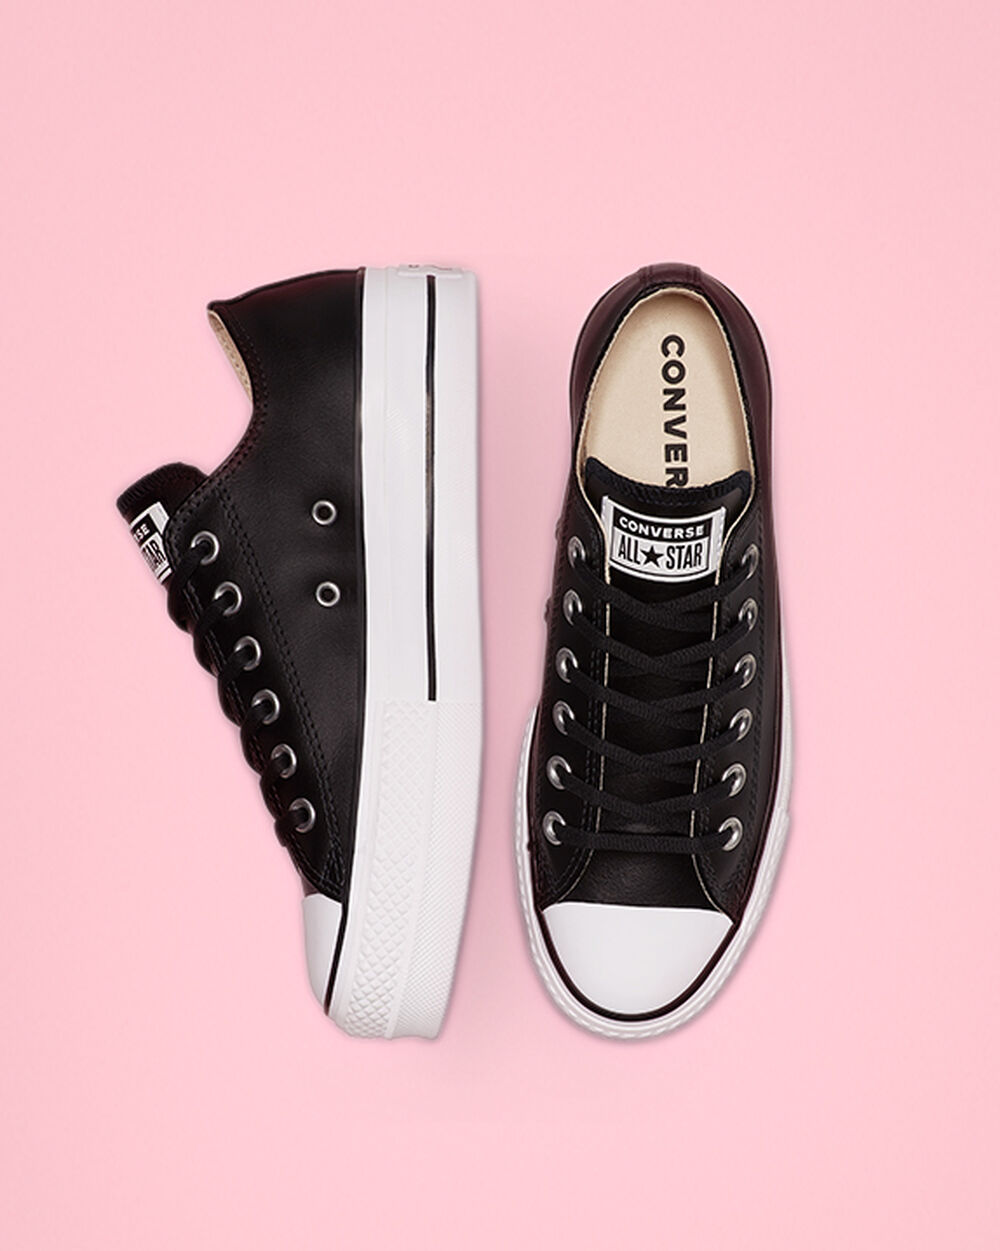 Tenis Converse Chuck Taylor All Star Mujer Negros Blancos | Mexico-014266